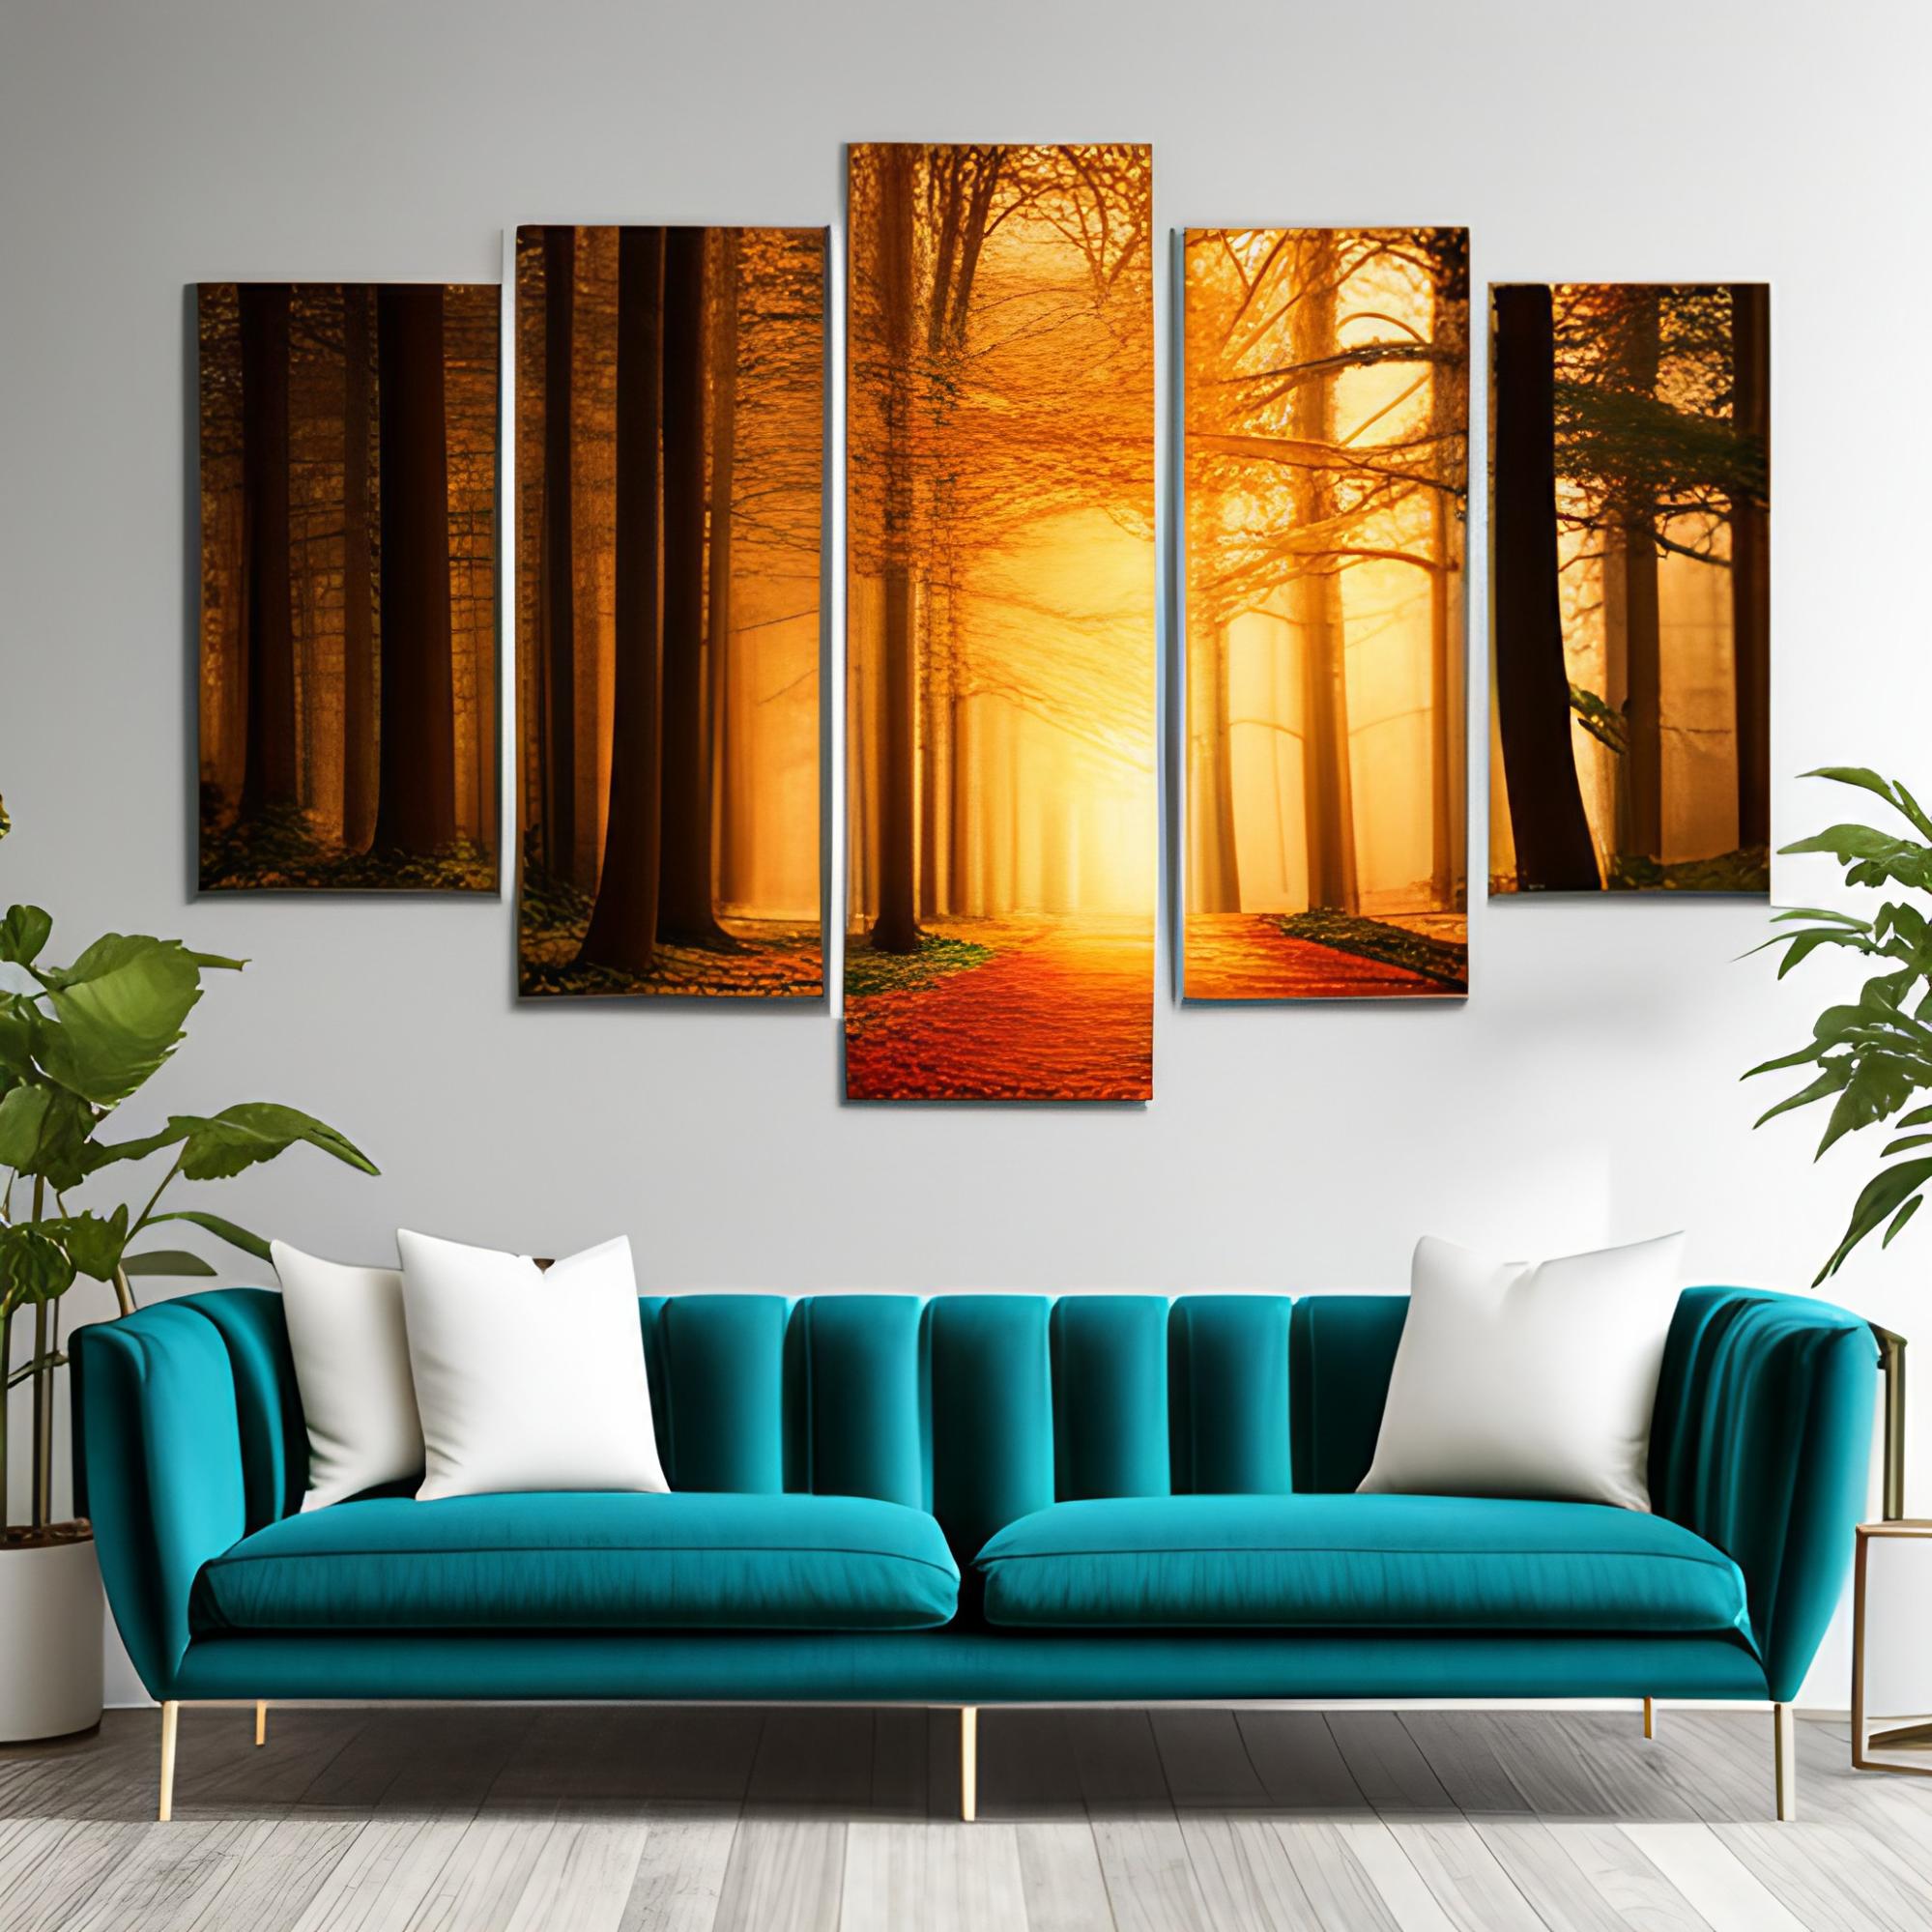 Wall Art: The Perfect Statement for Your Home | Beautiful Homes